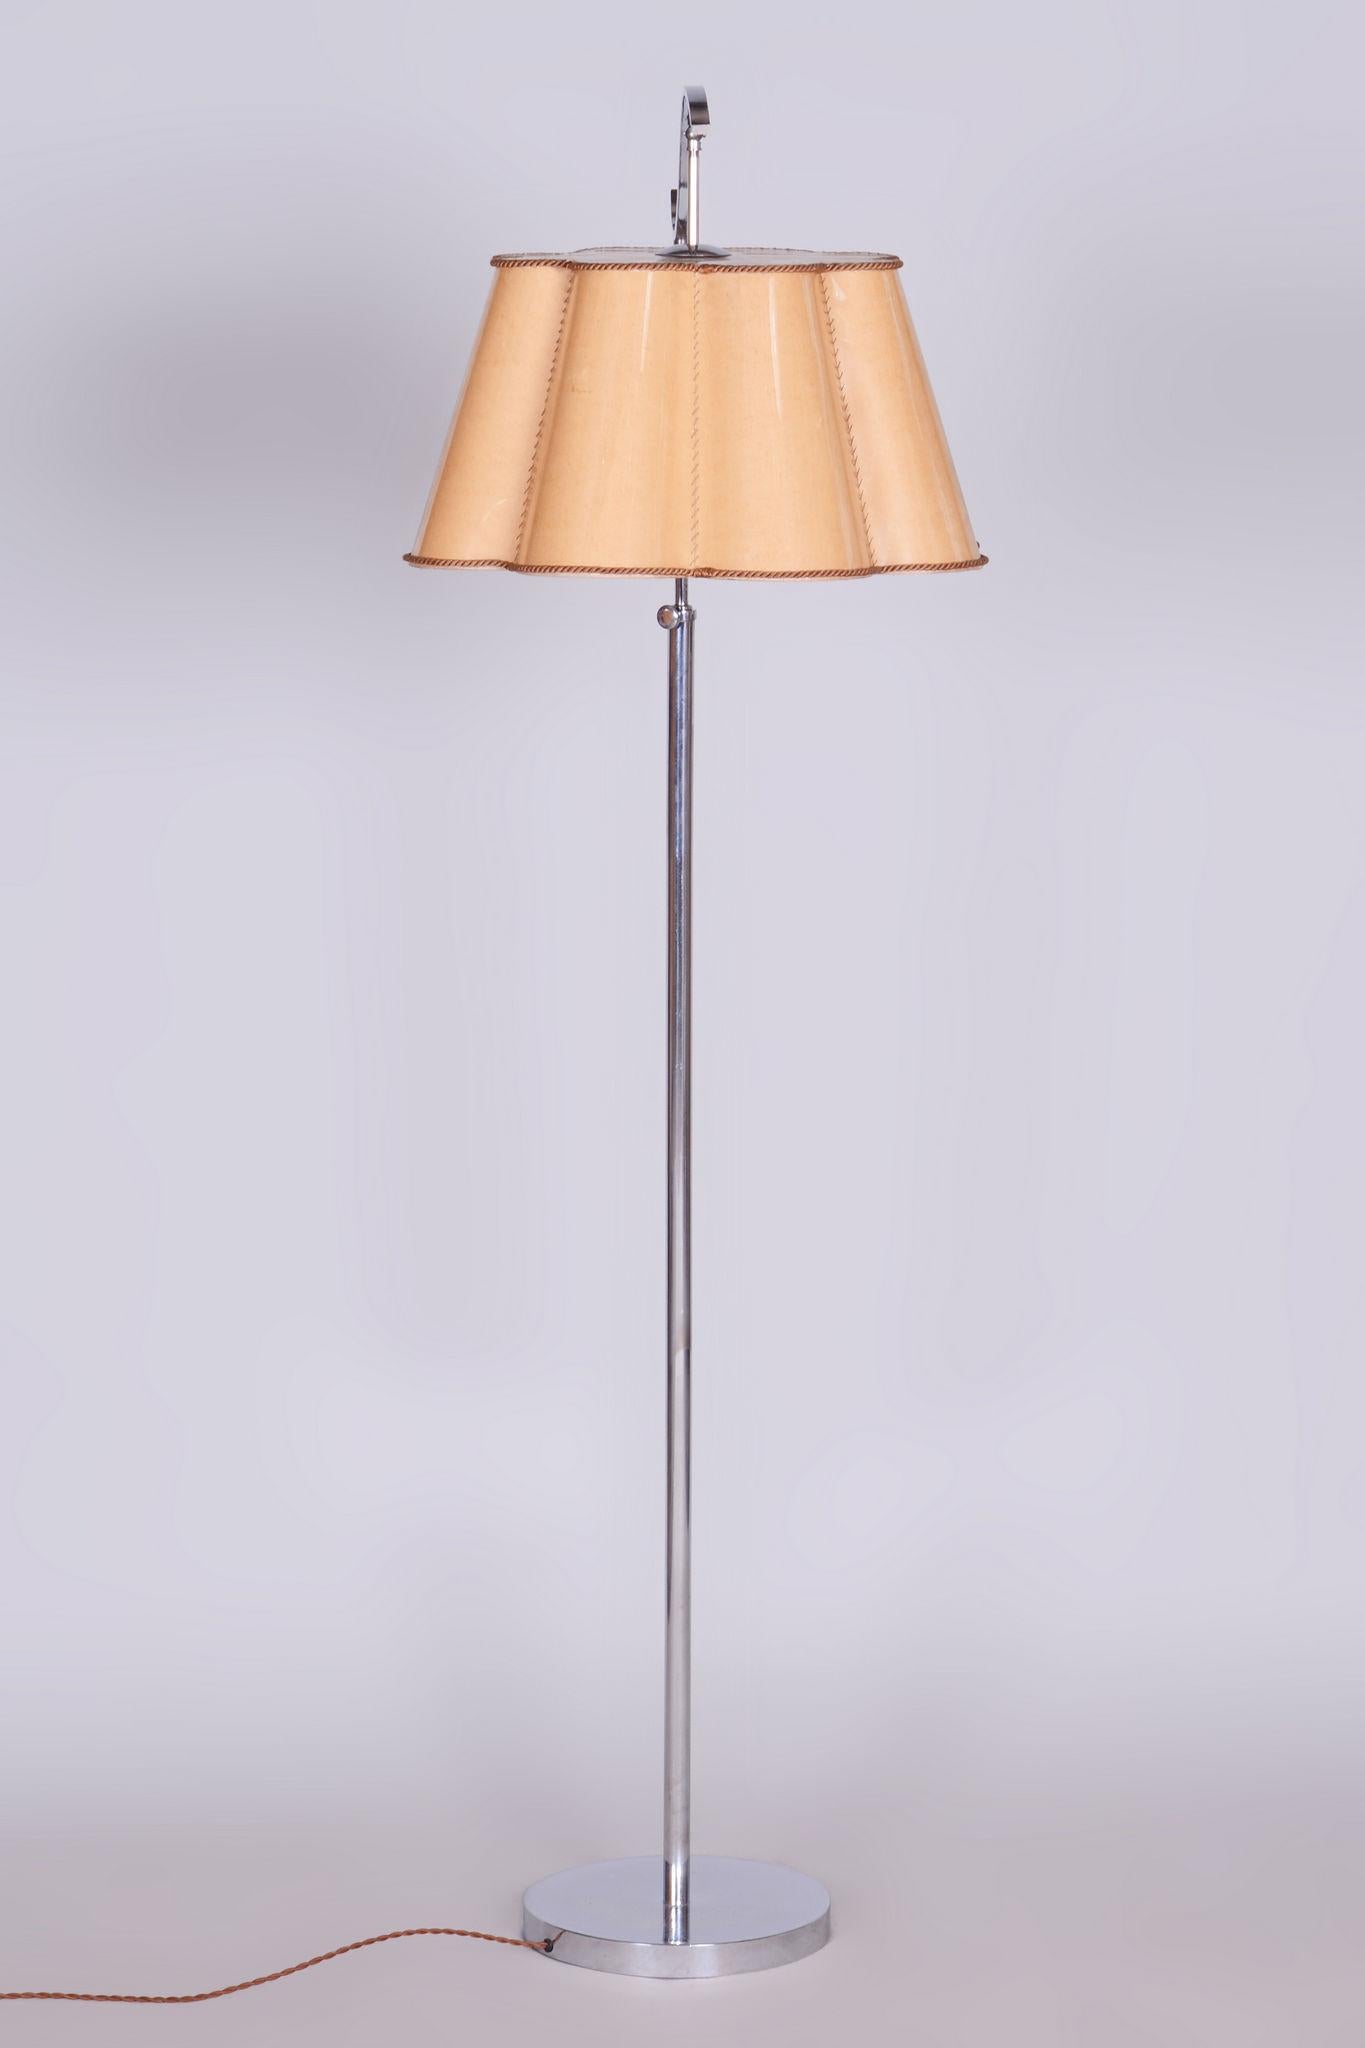 20th Century Czech Bauhaus Chrome Floor Lamp with Parchment Shade, 1920s For Sale 7